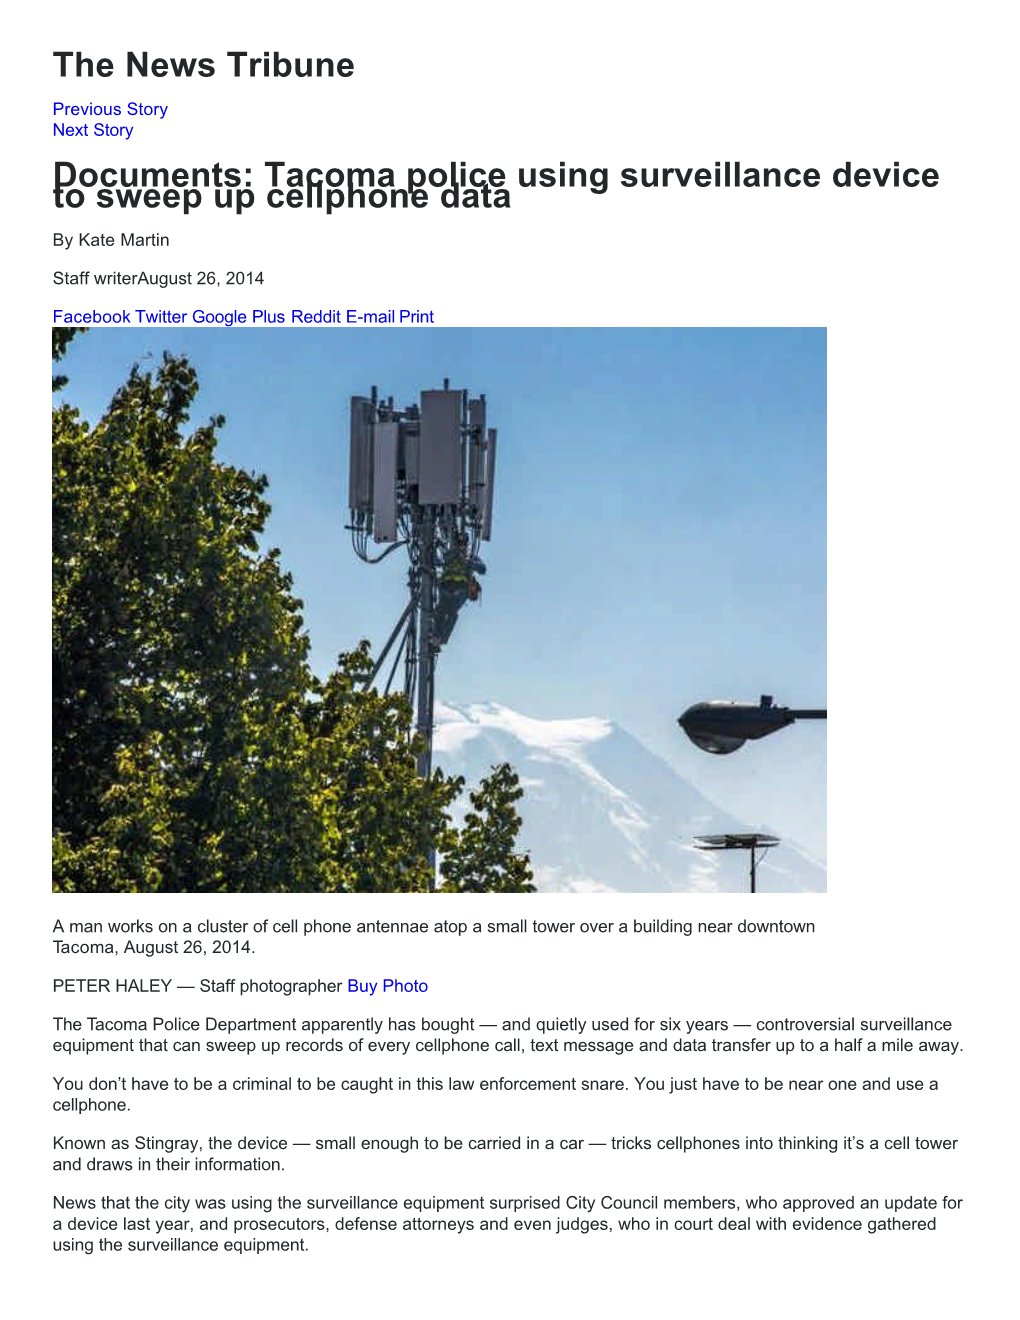 Tacoma Police Using Surveillance Device to Sweep up Cellphone Data by Kate Martin